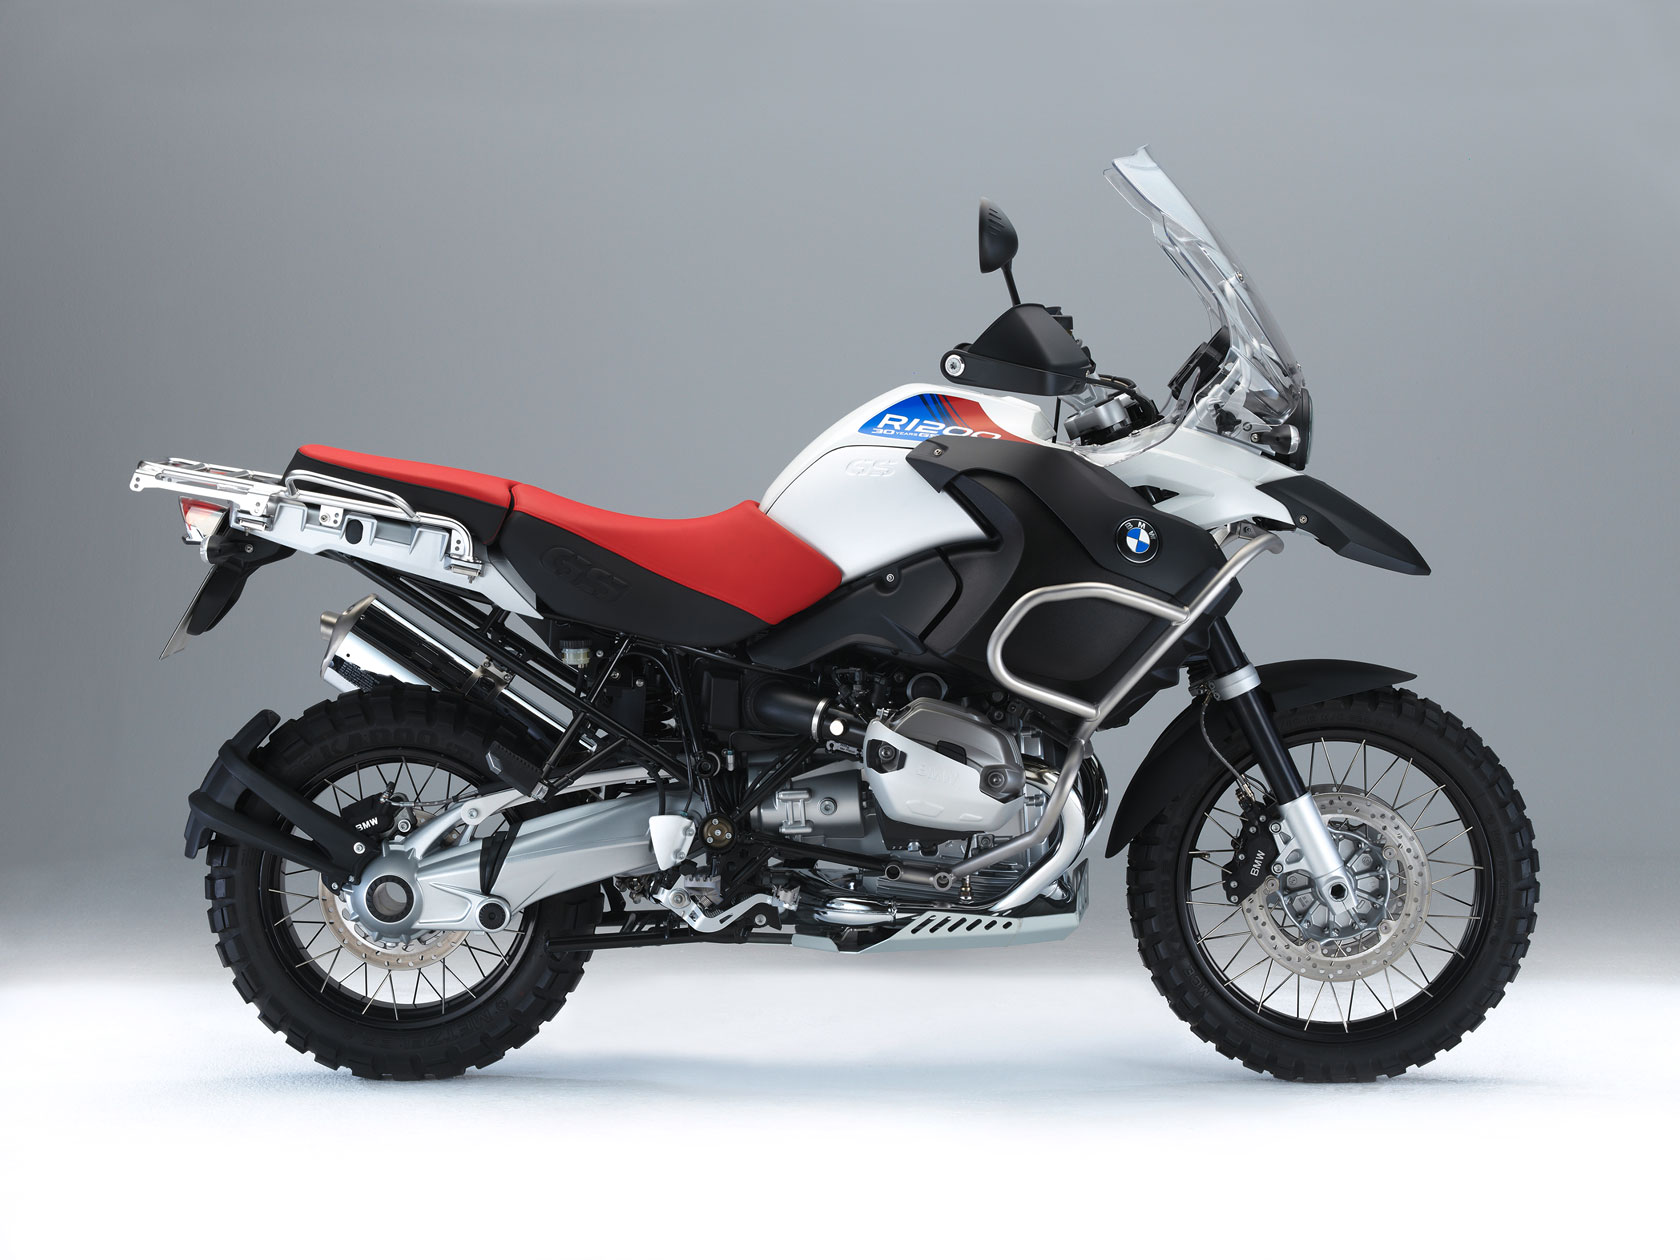 BMW R 1200 GS Adventure "30 Years GS" Special Model specs - 2010, 2011